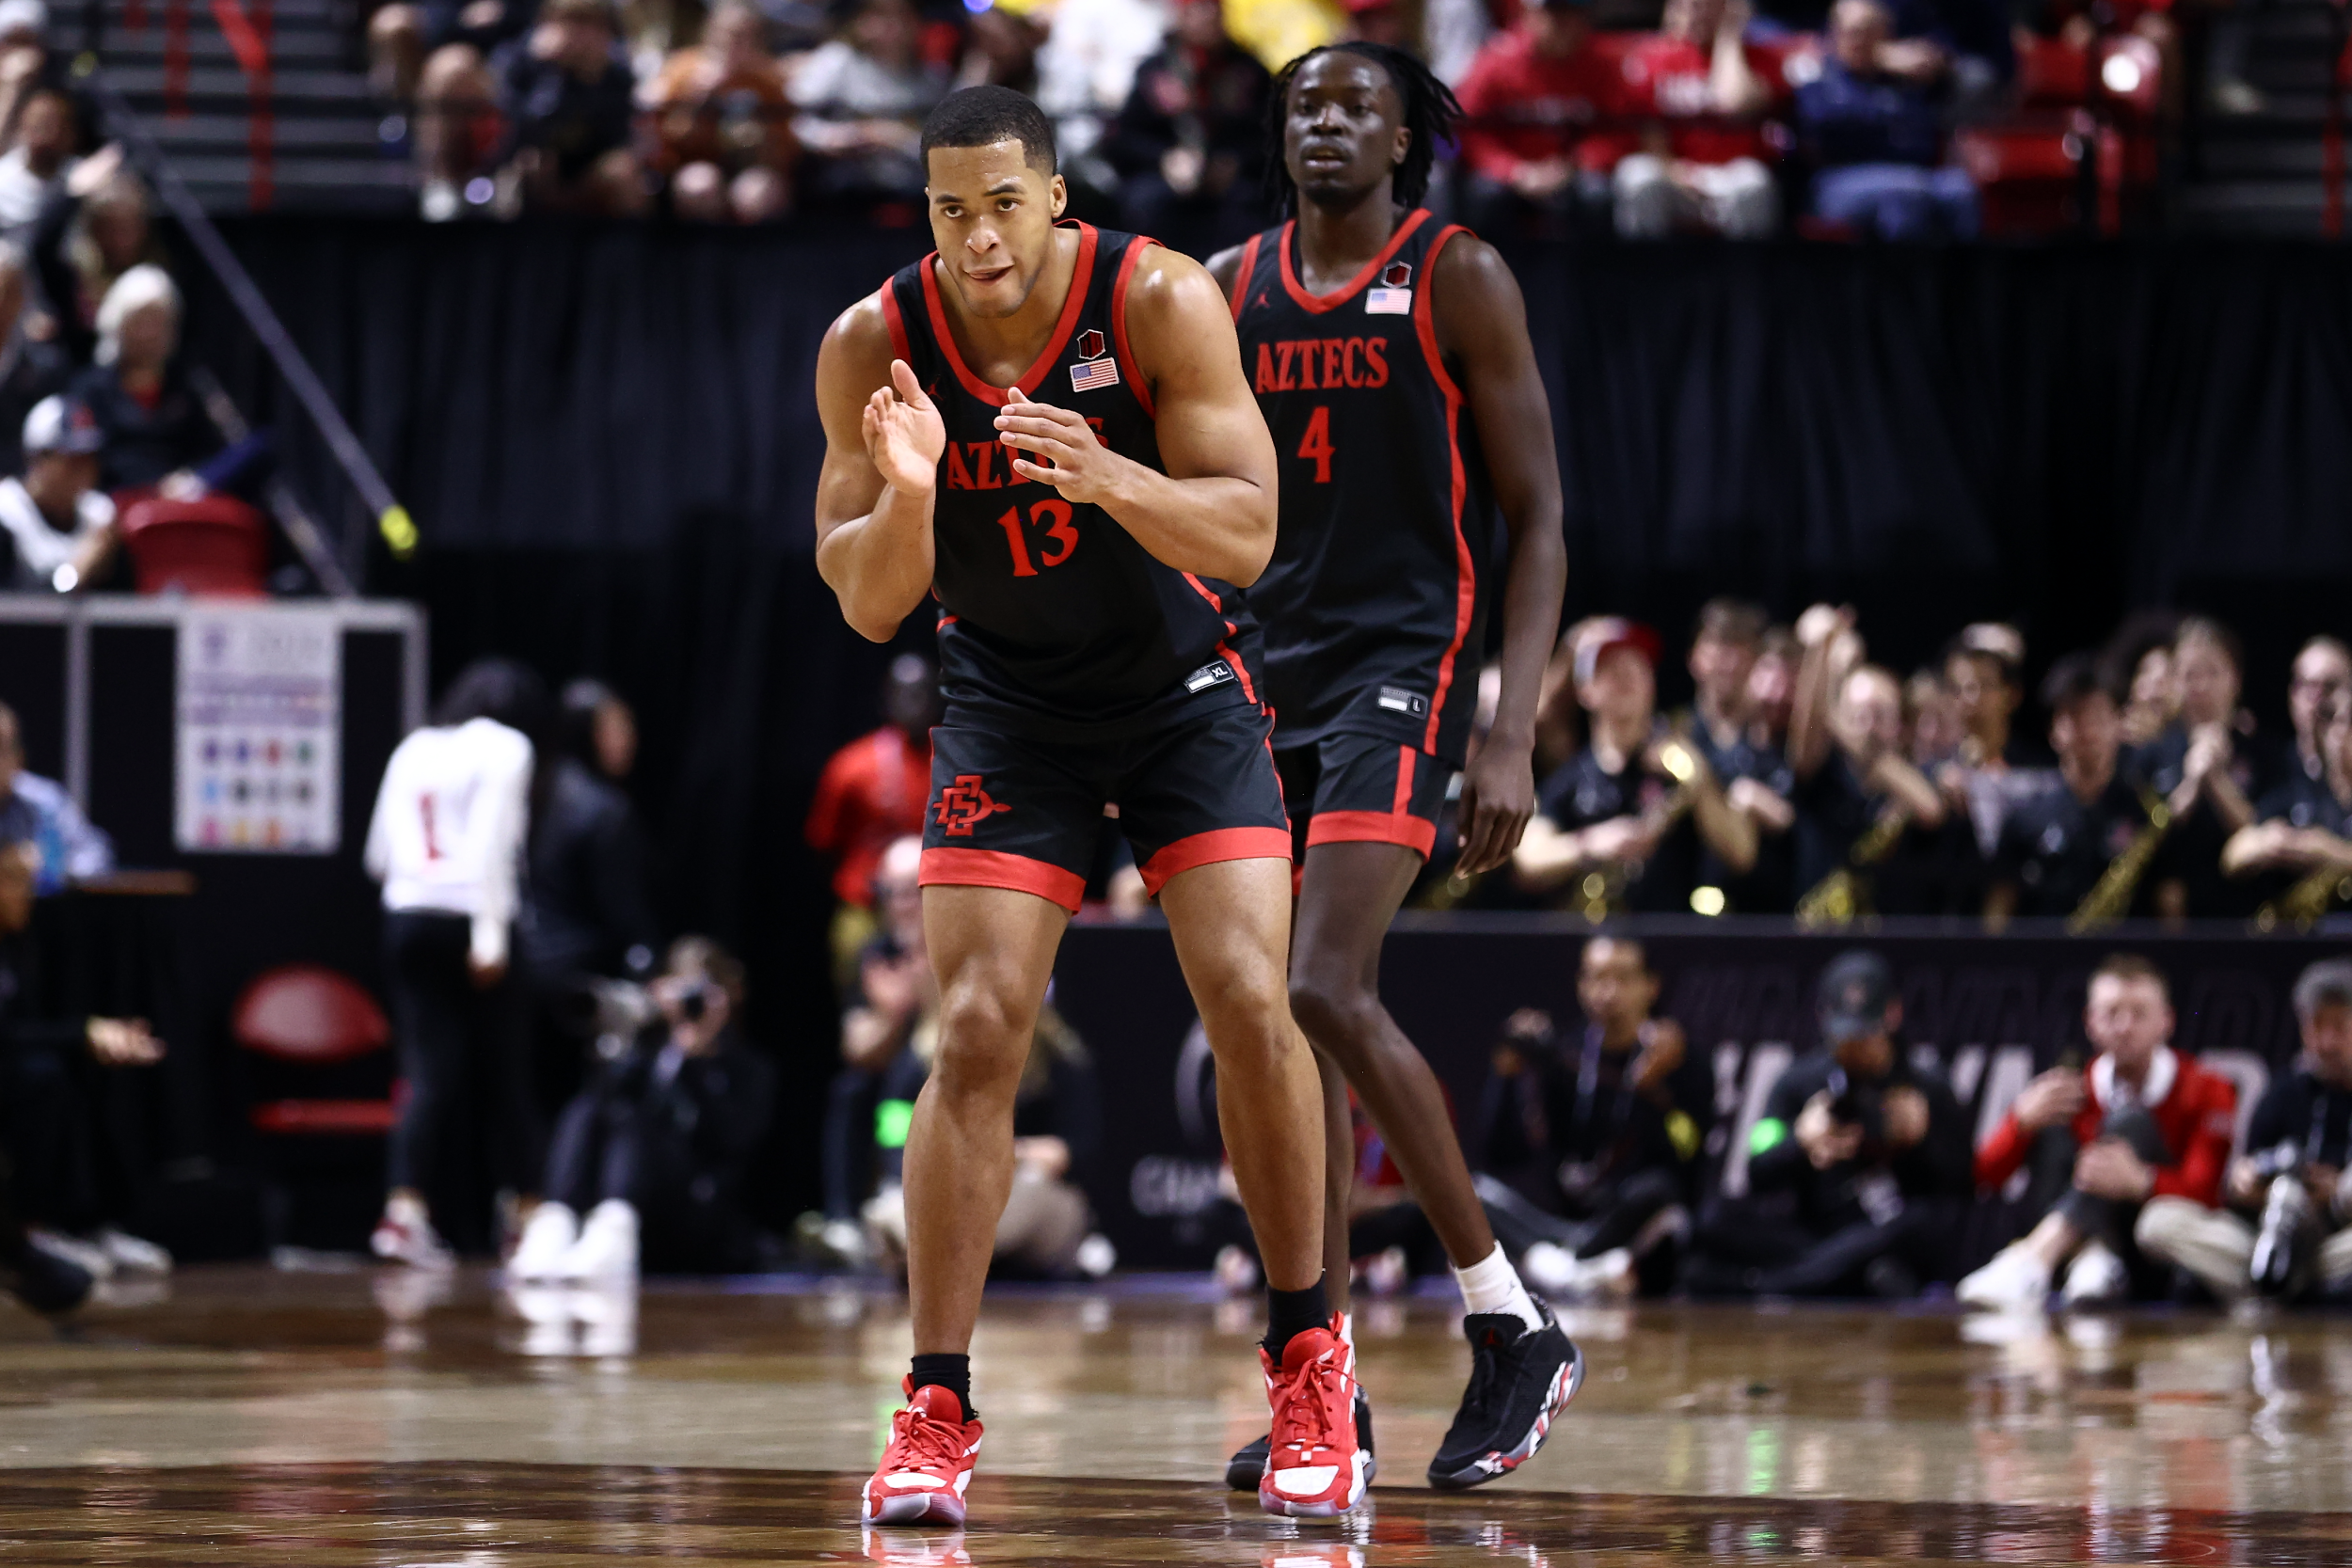 San Diego State edges UNLV to advance to MW Semifinals